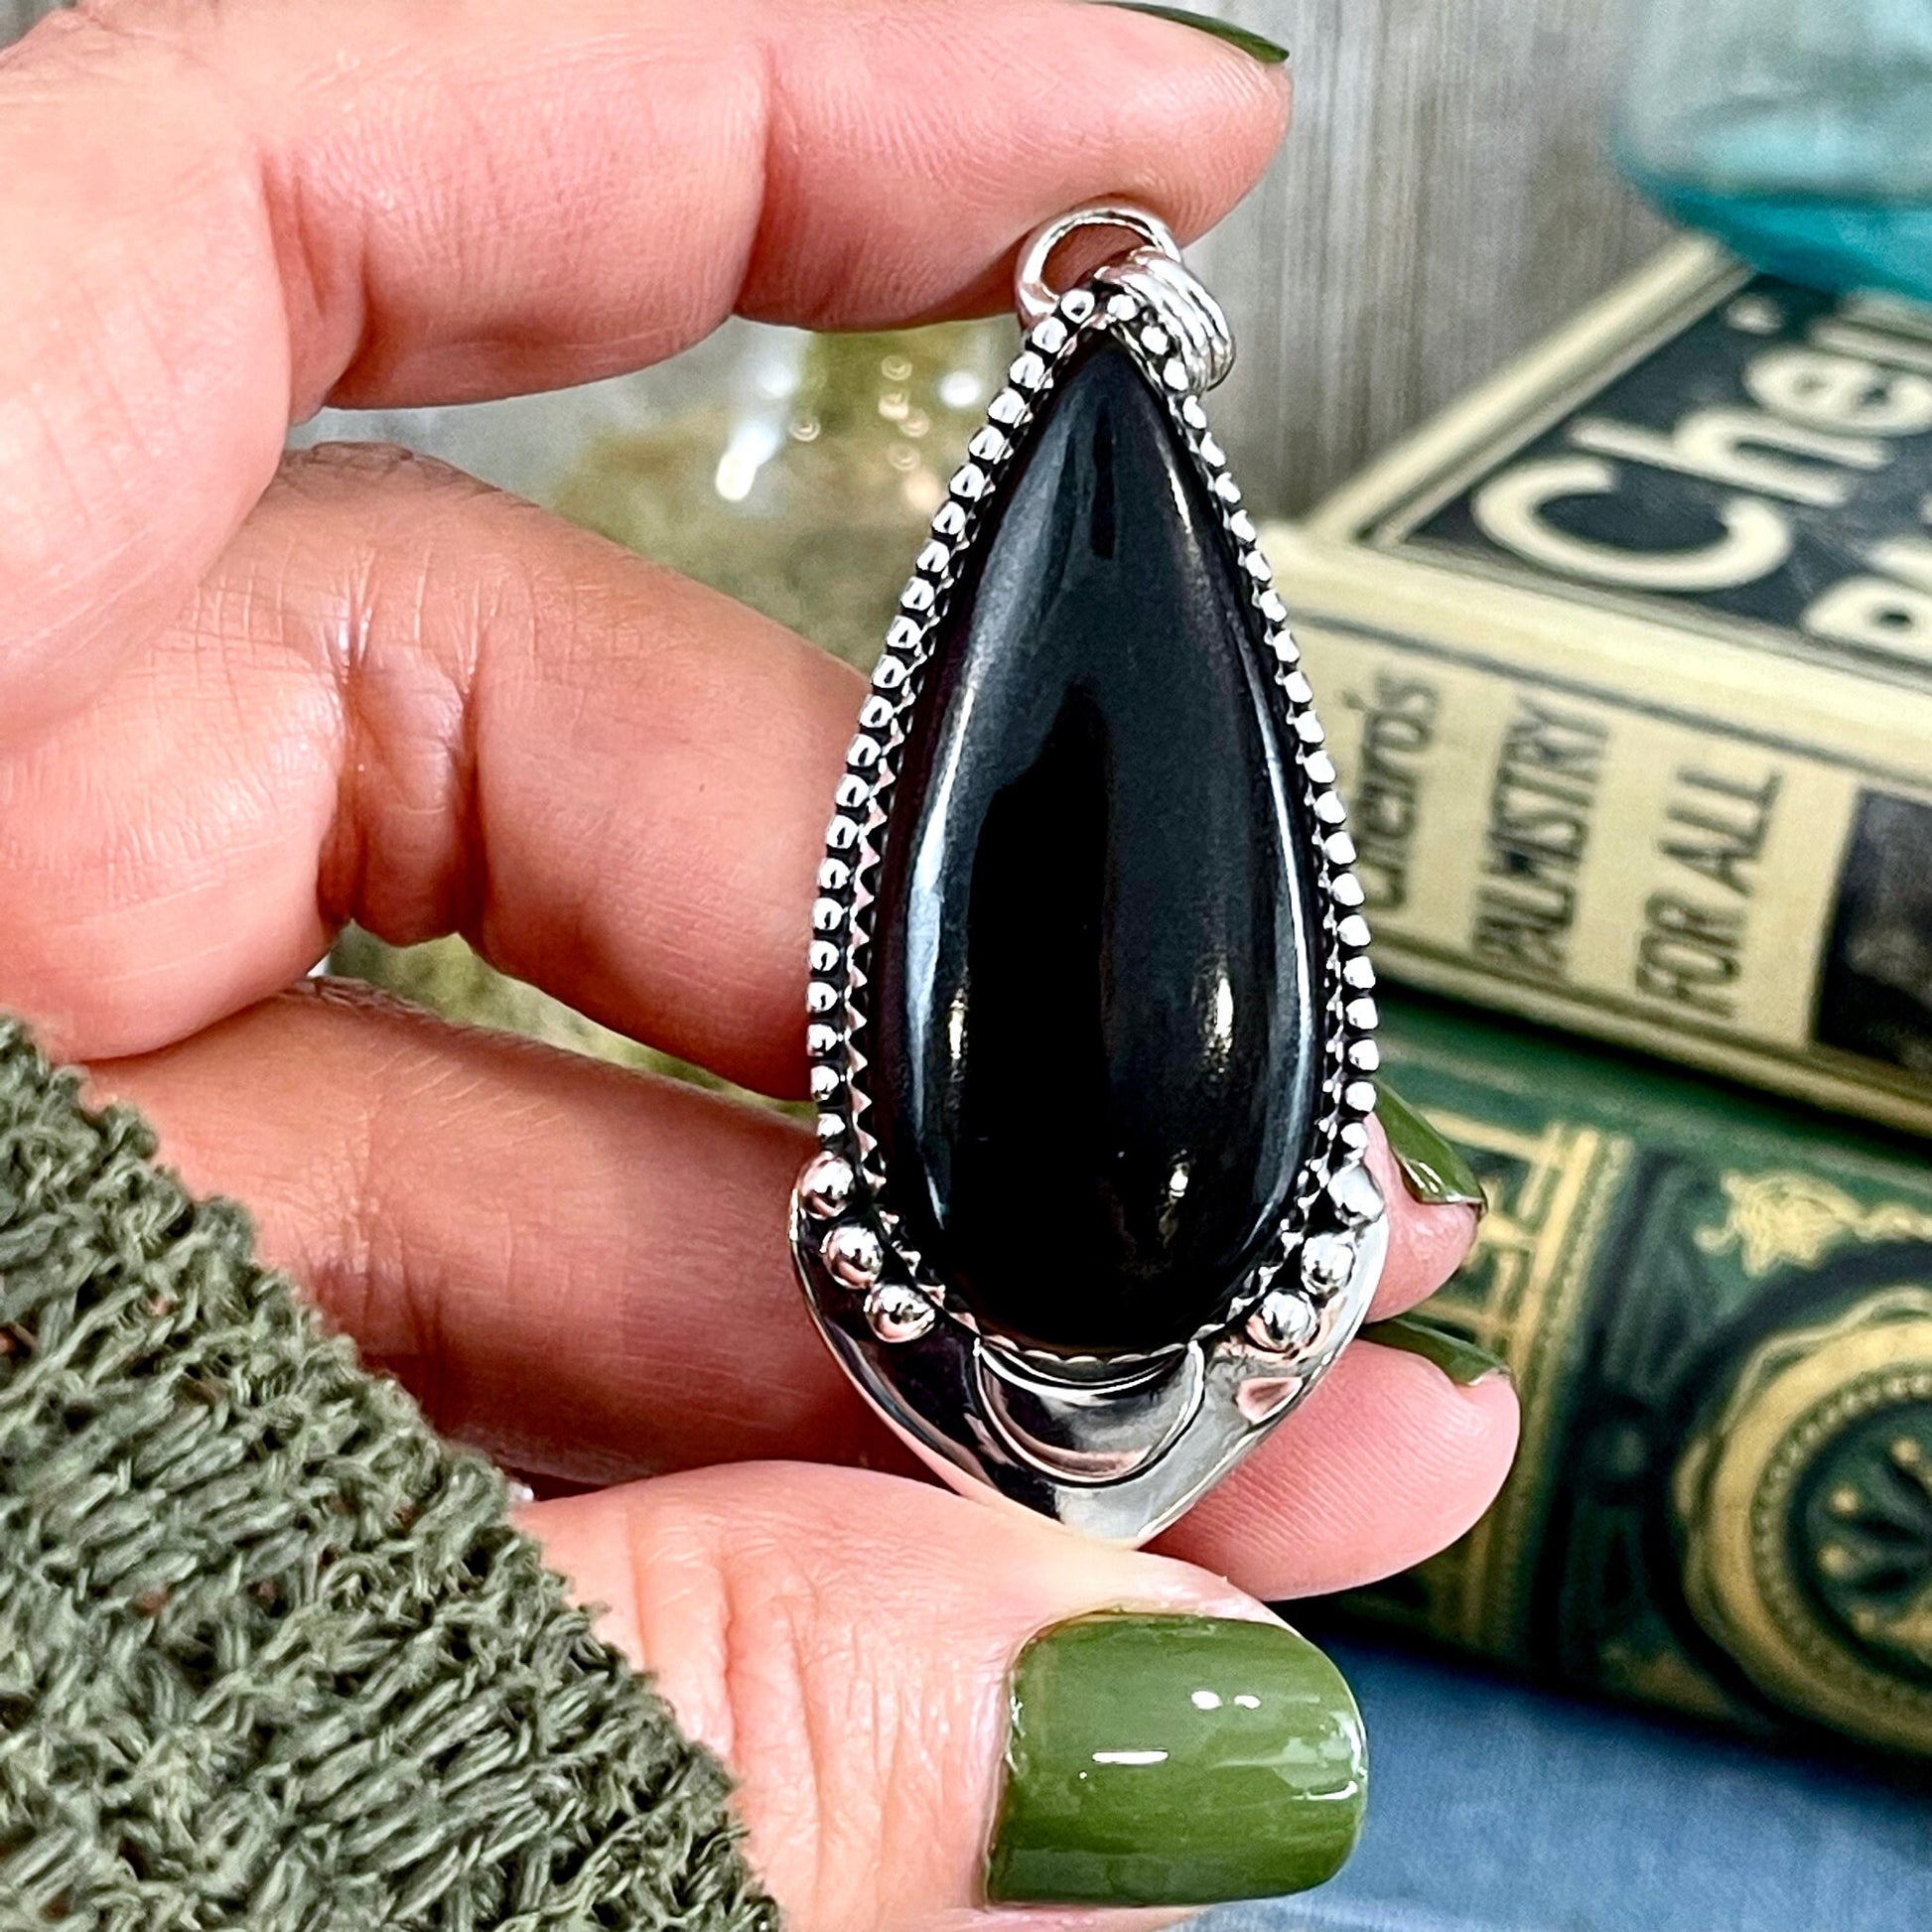 Midnight Moon Necklace- Black Onyx Crystal Teardrop Necklace in Sterling Silver -Designed by FOXLARK Collection/ Witchy Crystal Necklace